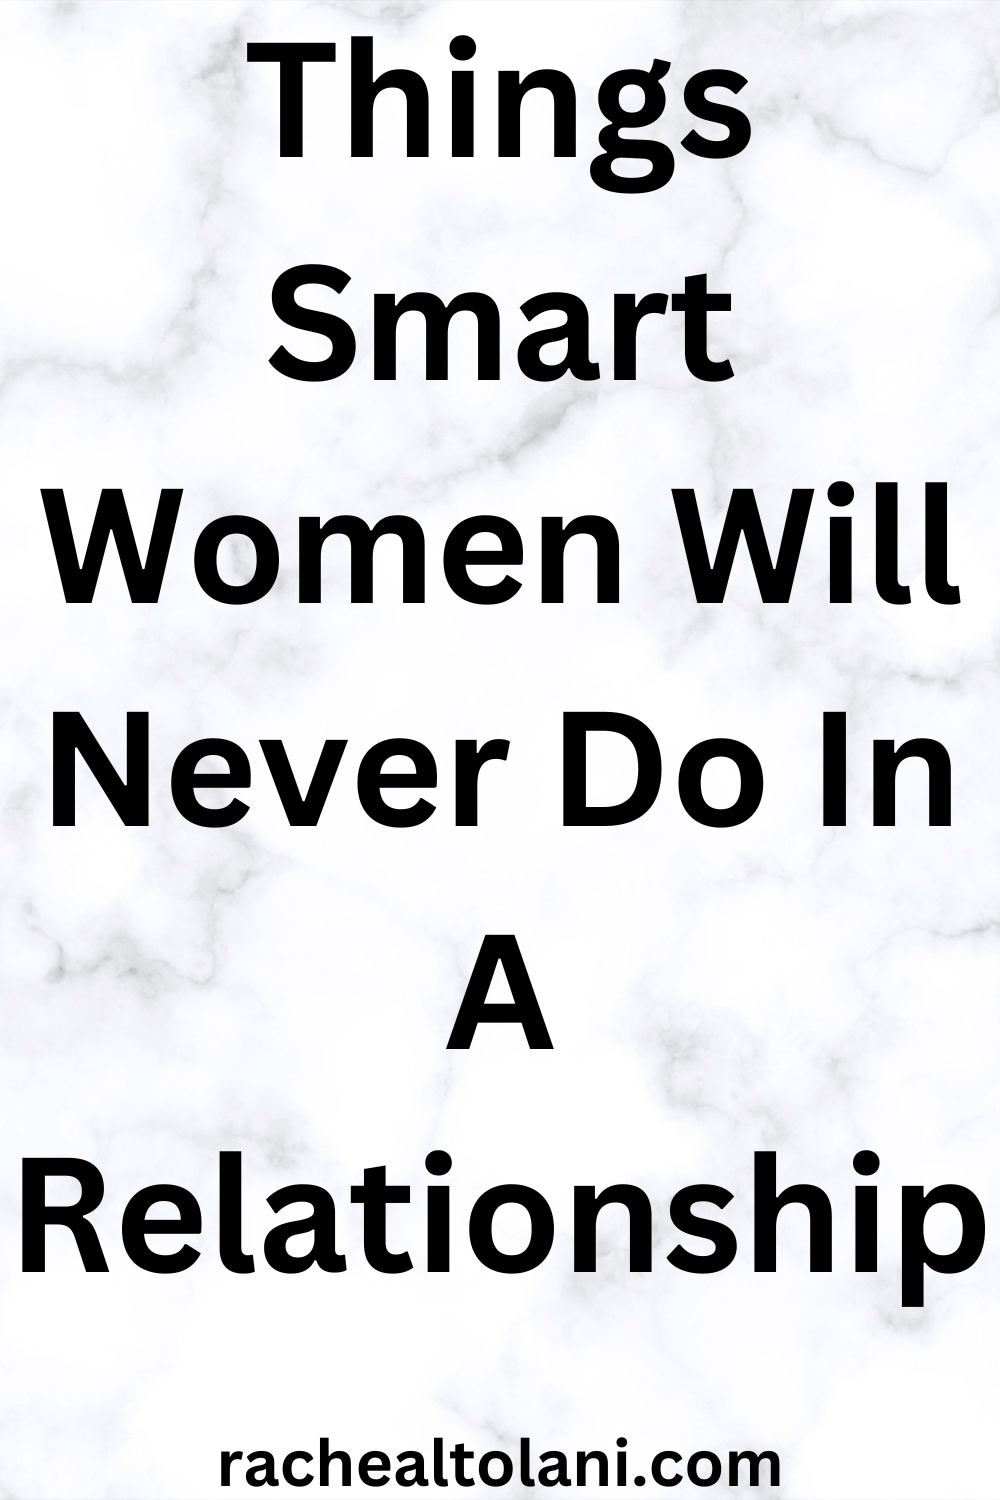 Things smart women will never do in a relationship